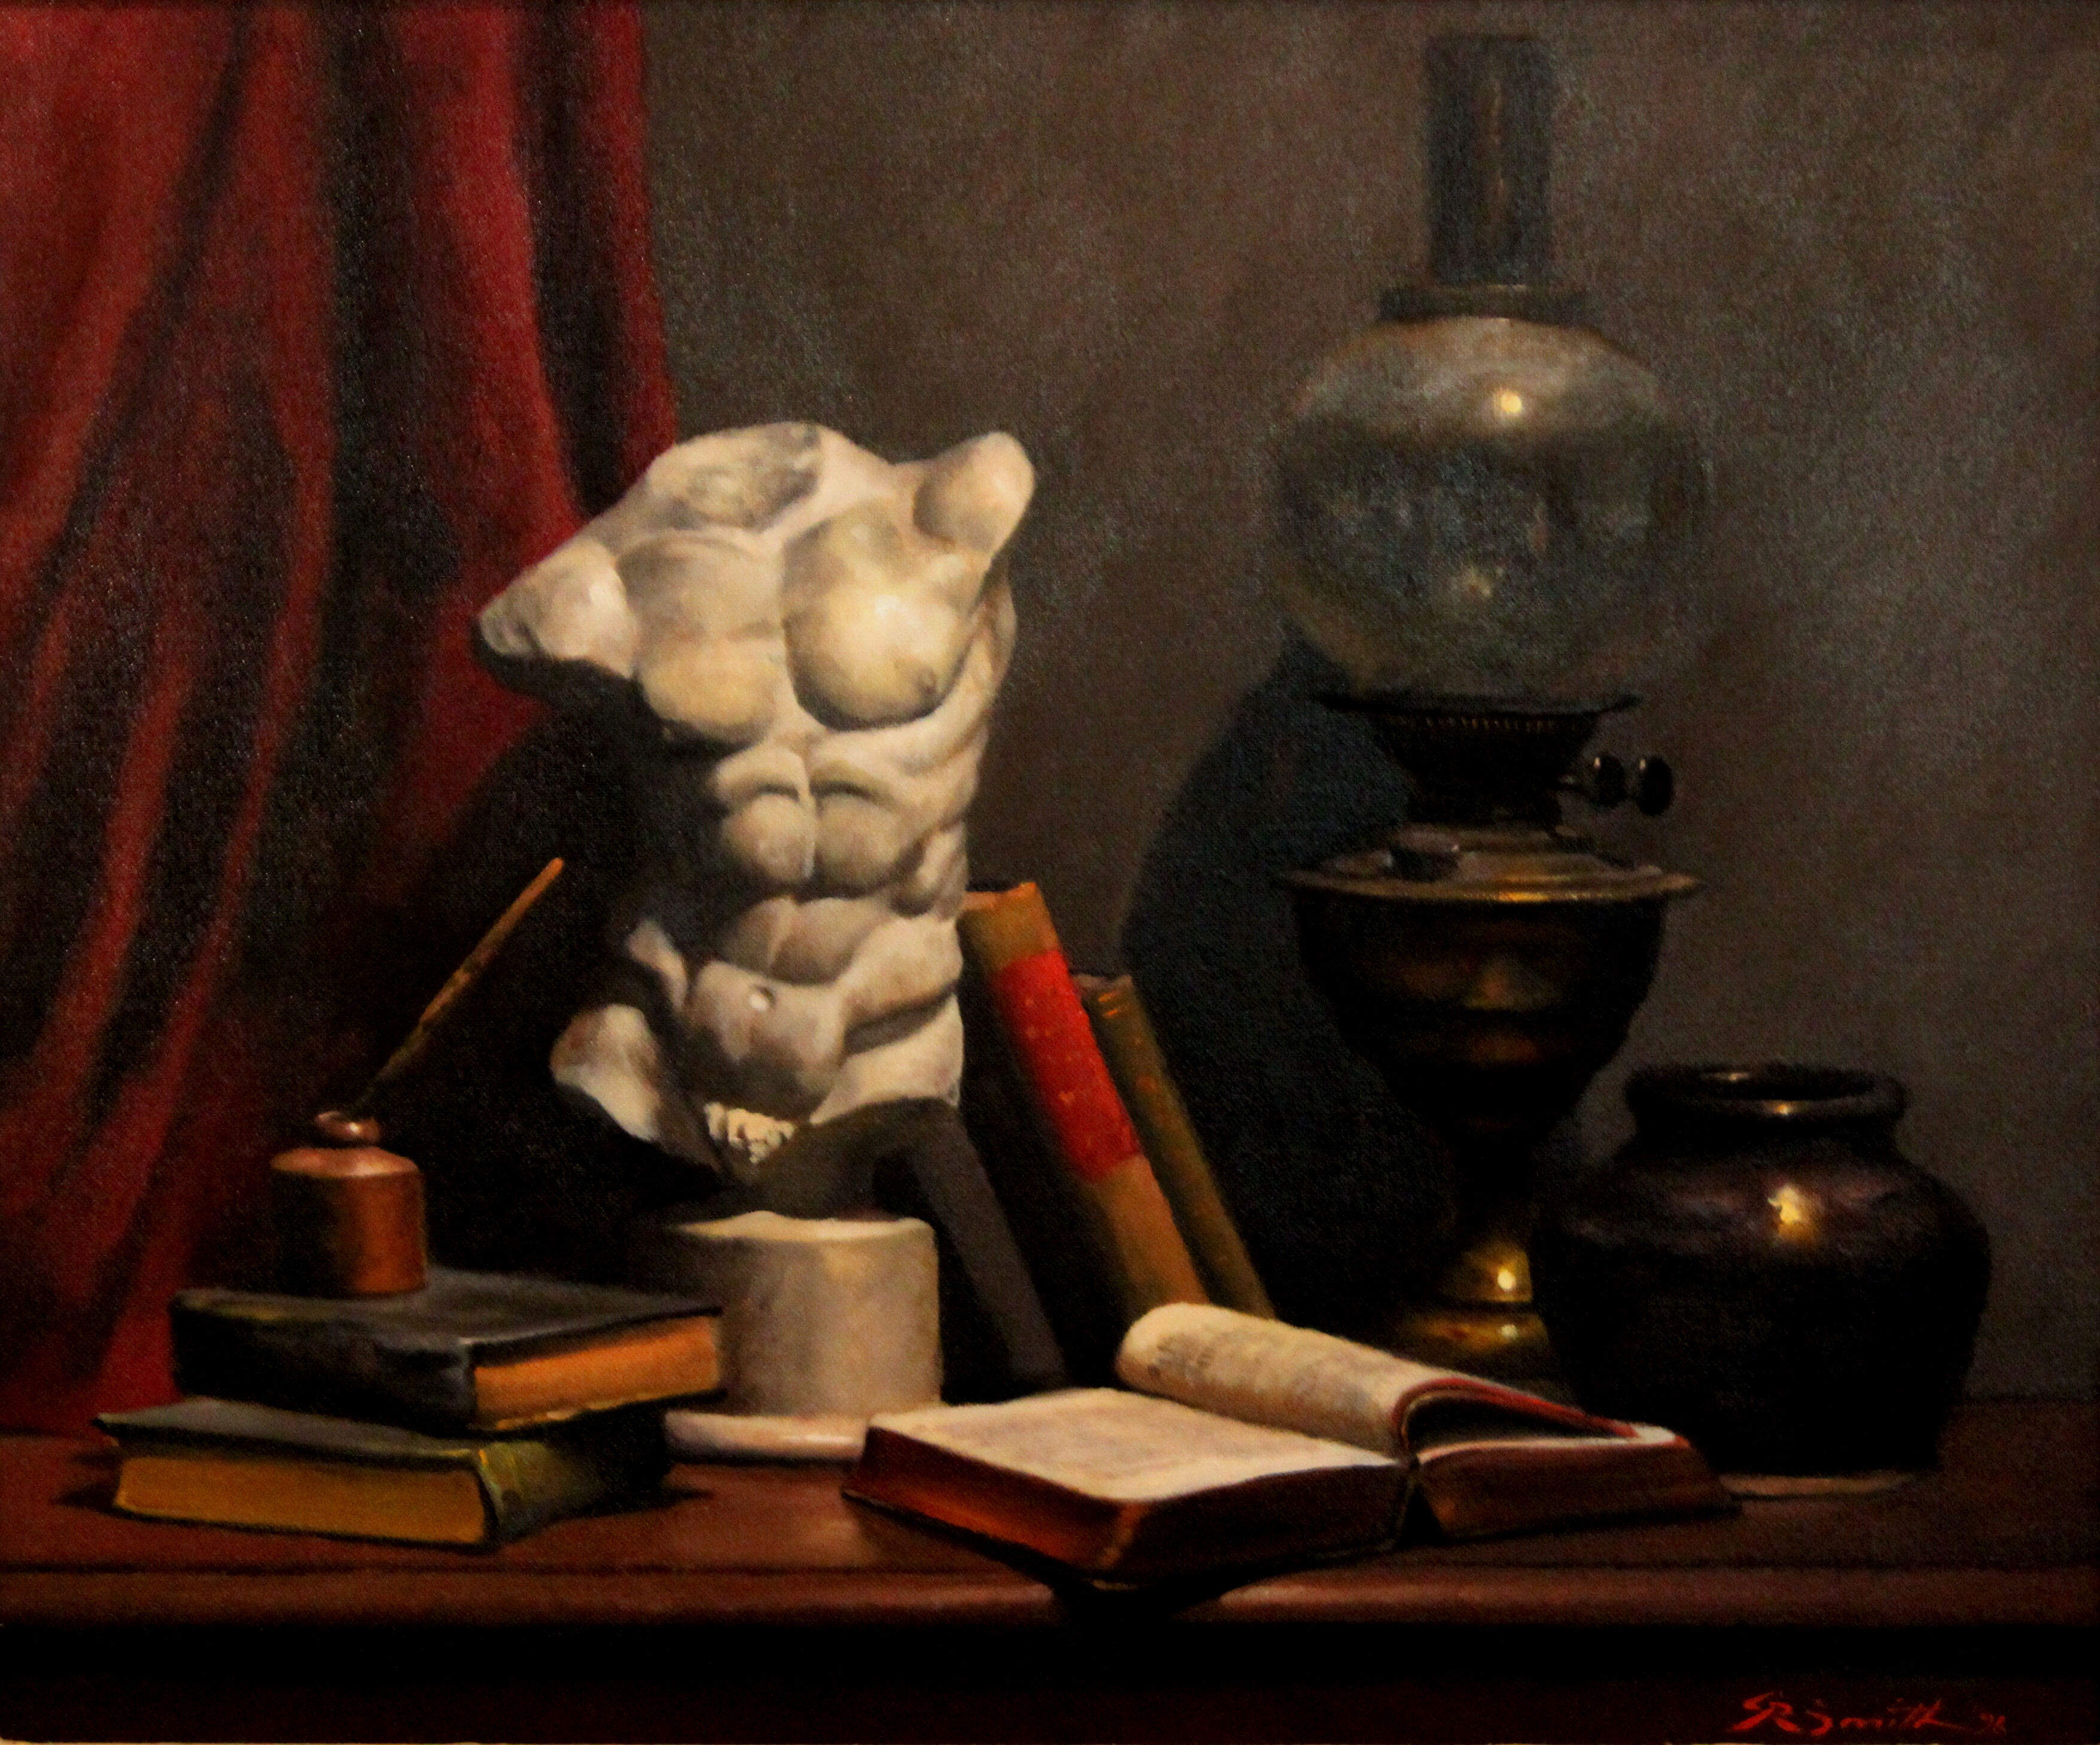 077_Still Life With Torso_Gregory R Smith